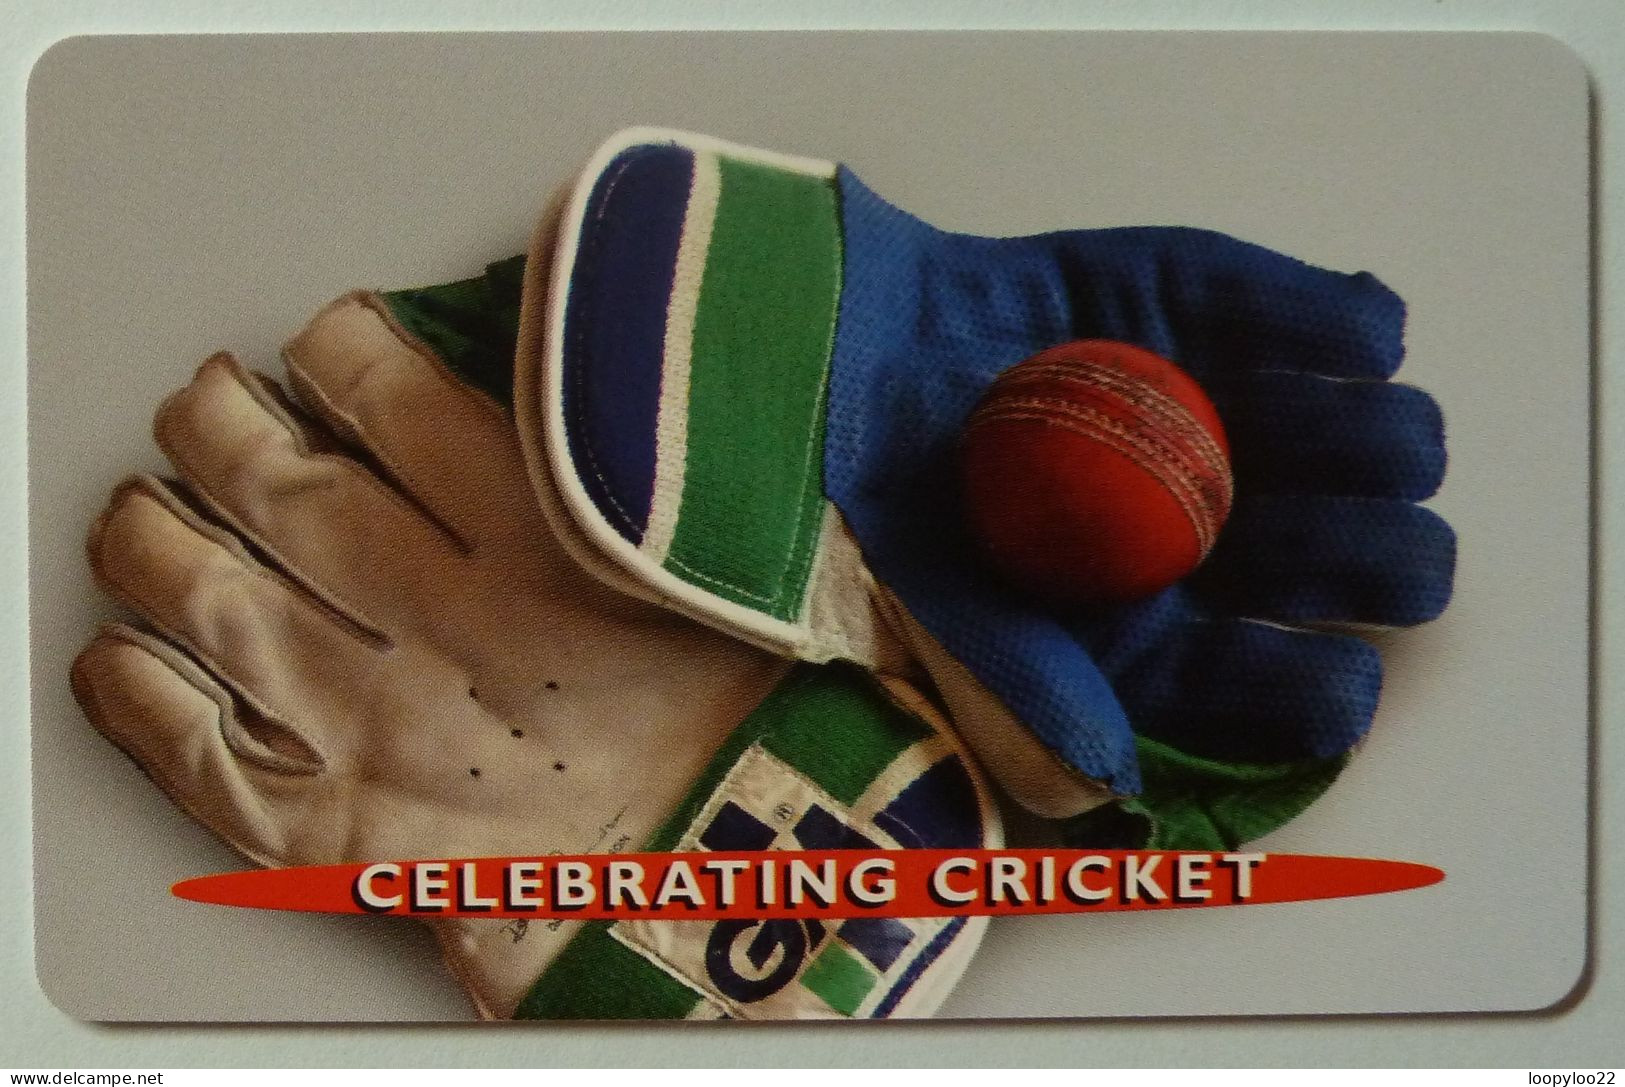 SOUTH AFRICA - MTN - Specimen Without Control - Celebrating Cricket - R15 - South Africa